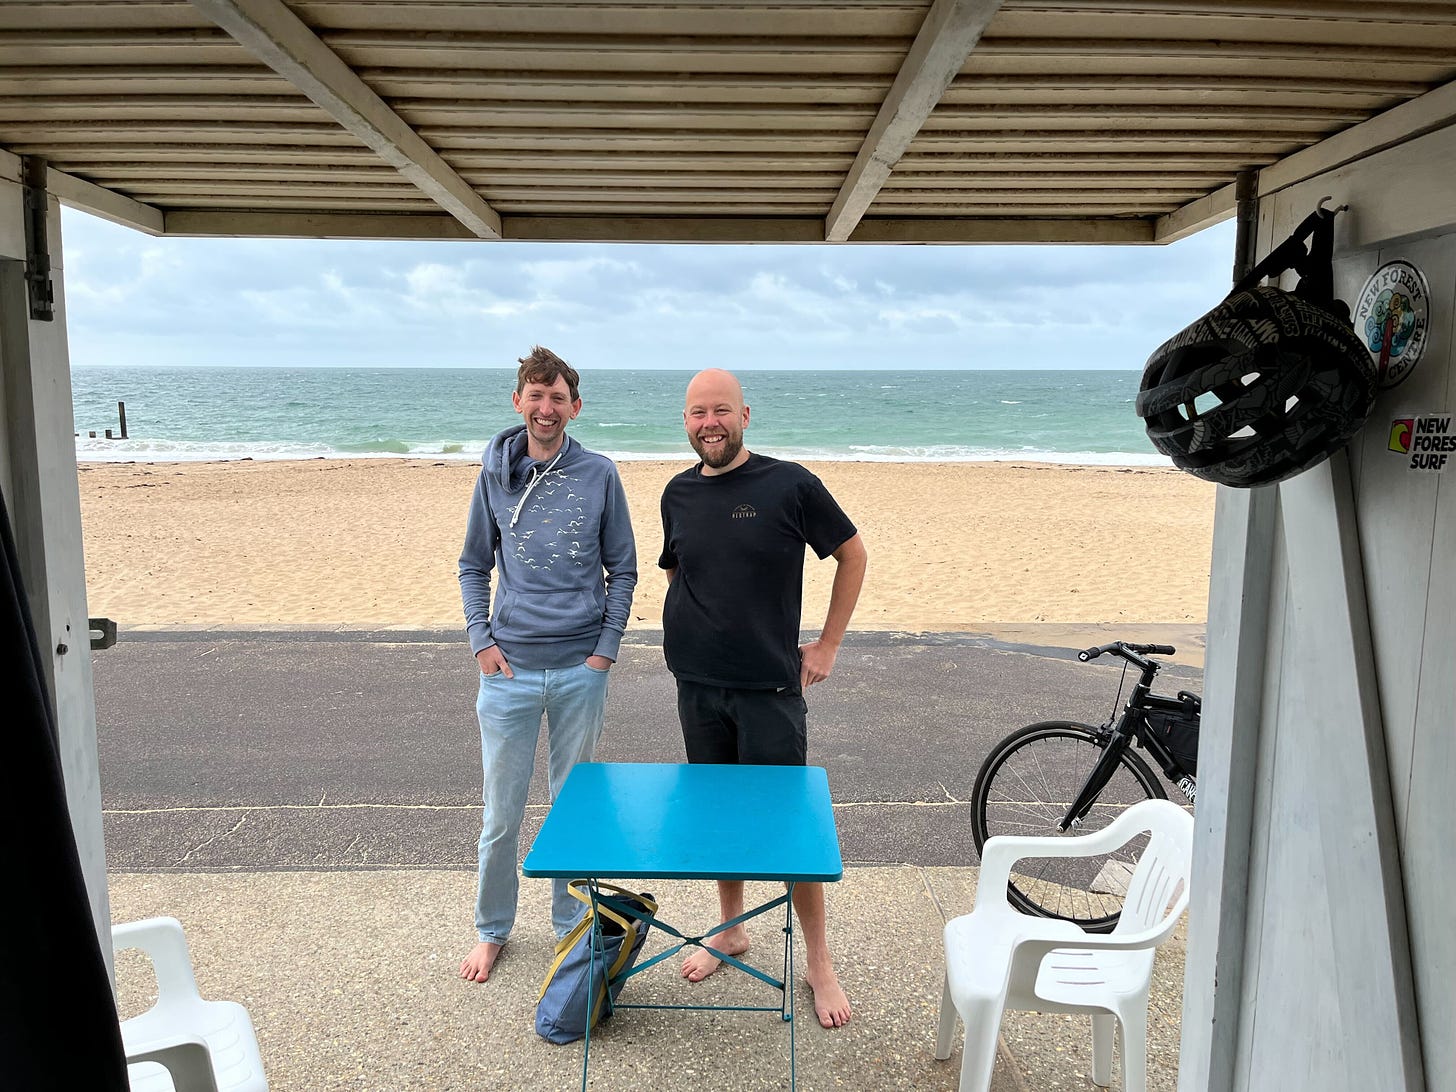 Nick and Tom standing in front of a beach hut with the sea behind them